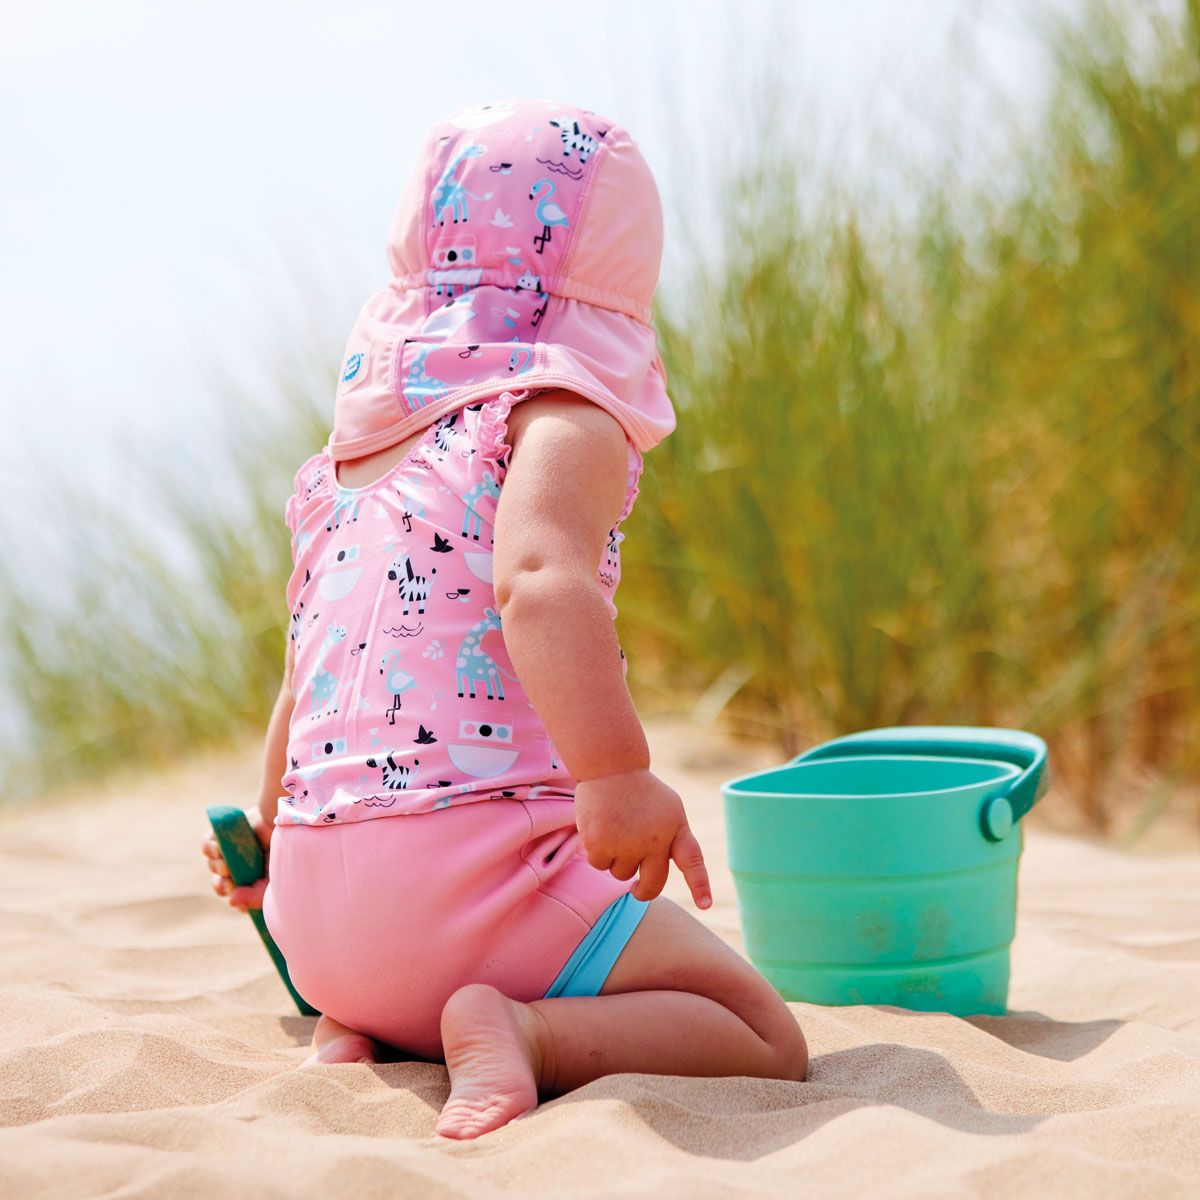 Lifestyle image of toddler wearing a legionnaire style sun hat in the beach. The hat is baby pink, with Noah's Ark themed print panel including giraffes, zebras, flamingos and more. She's also wearing matching Happy Nappy costume. Back.